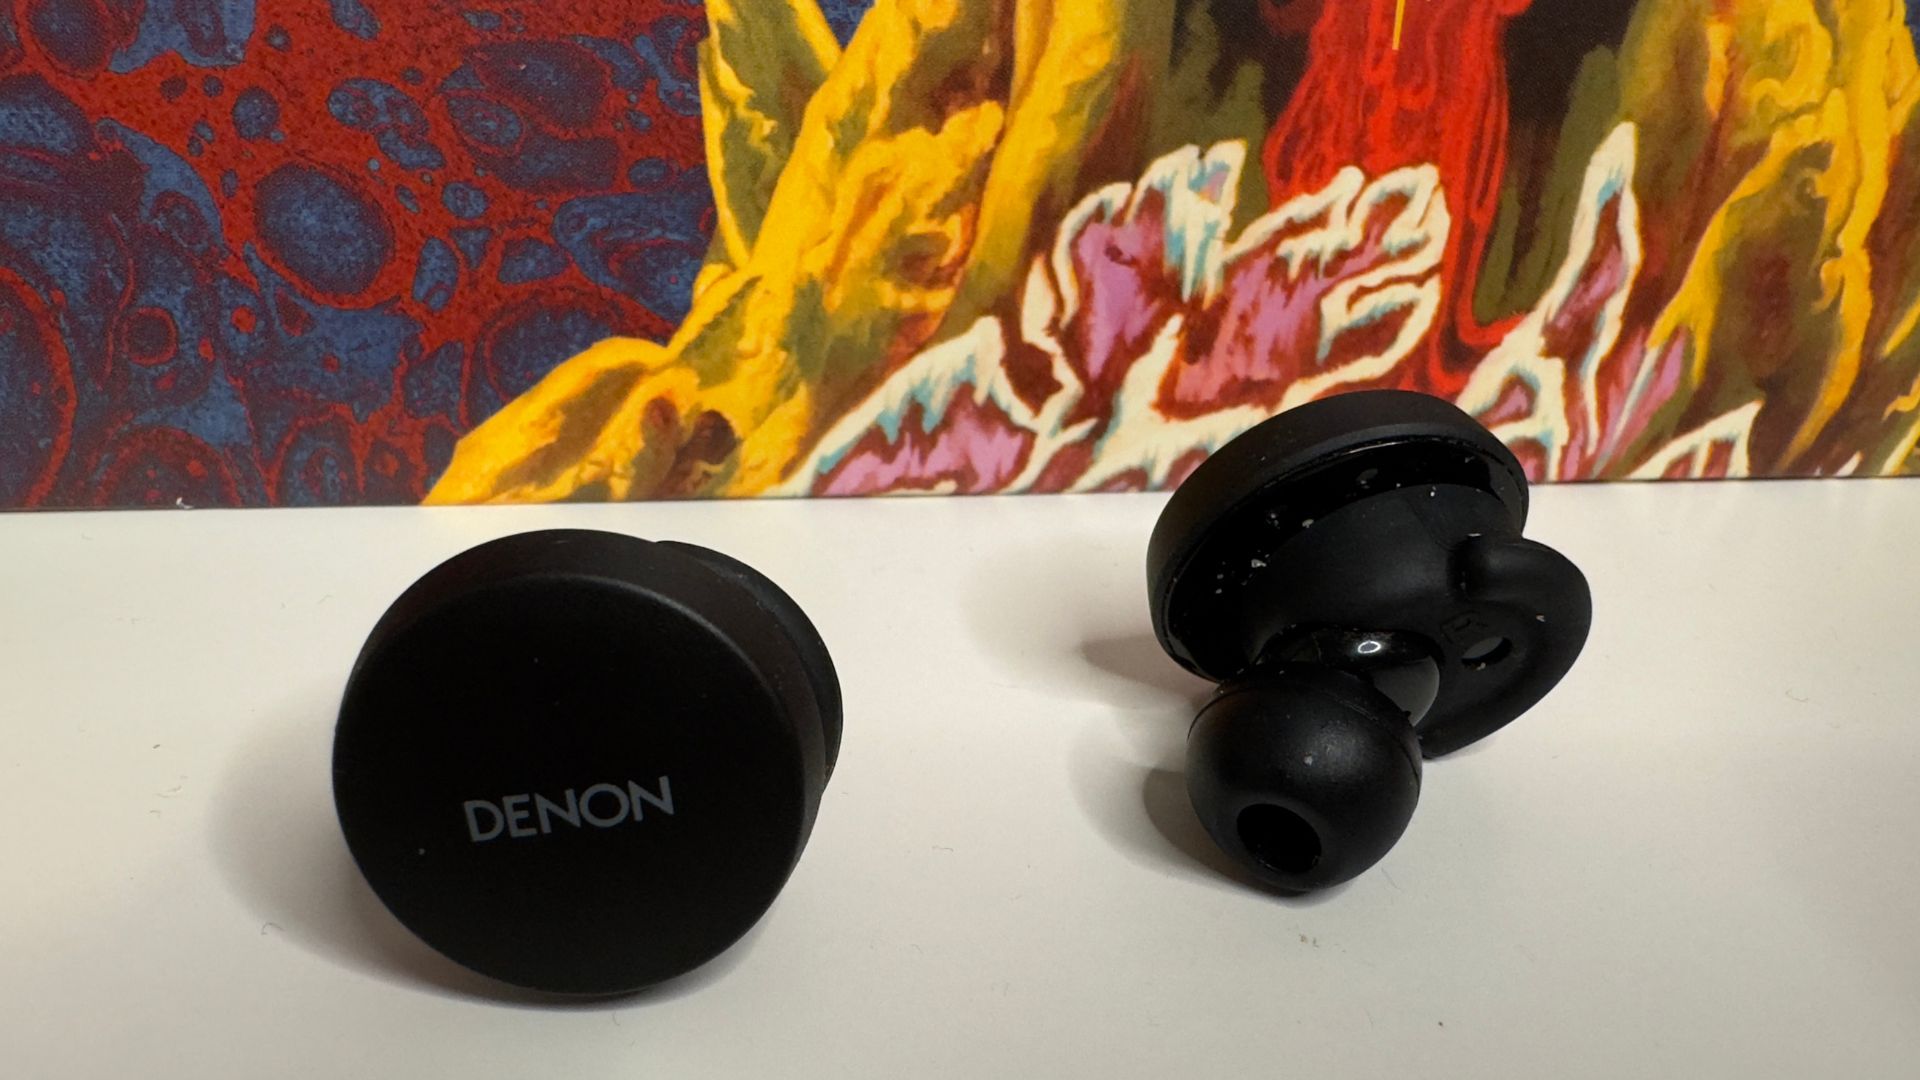 Denon PerL earbuds in front of a record